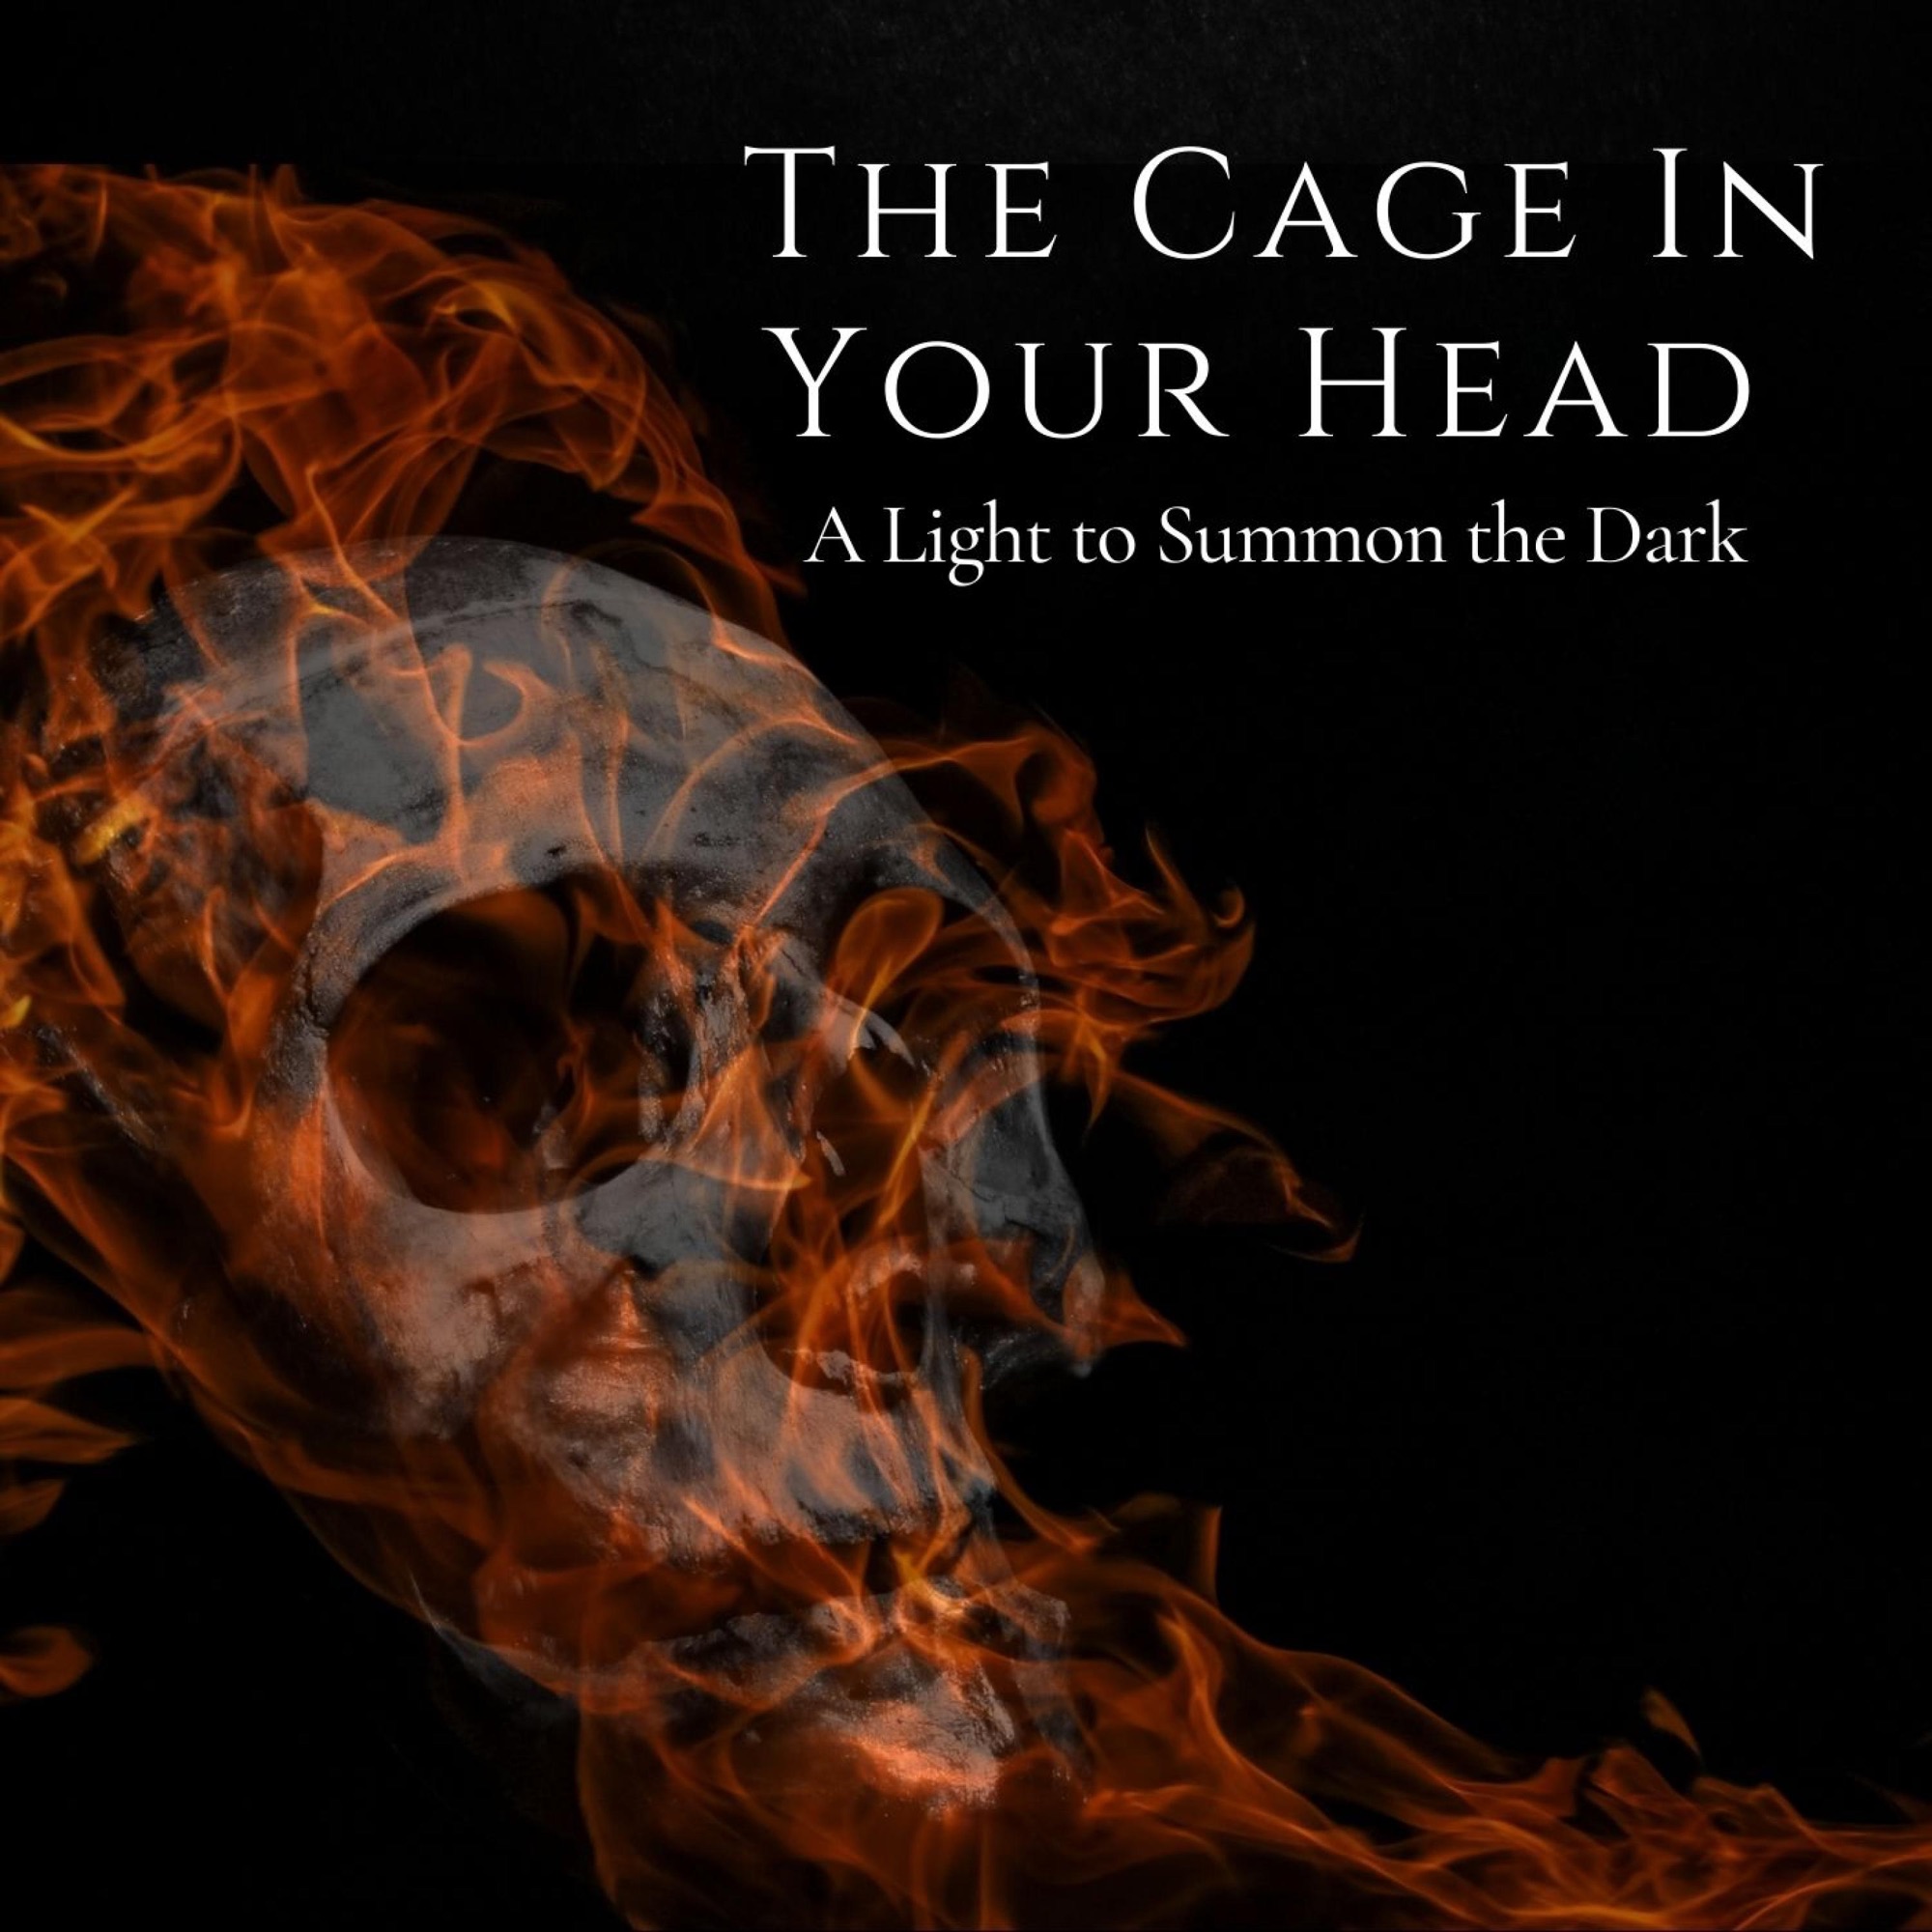 Art for A Light to Summon the Dark by The Cage in Your Head